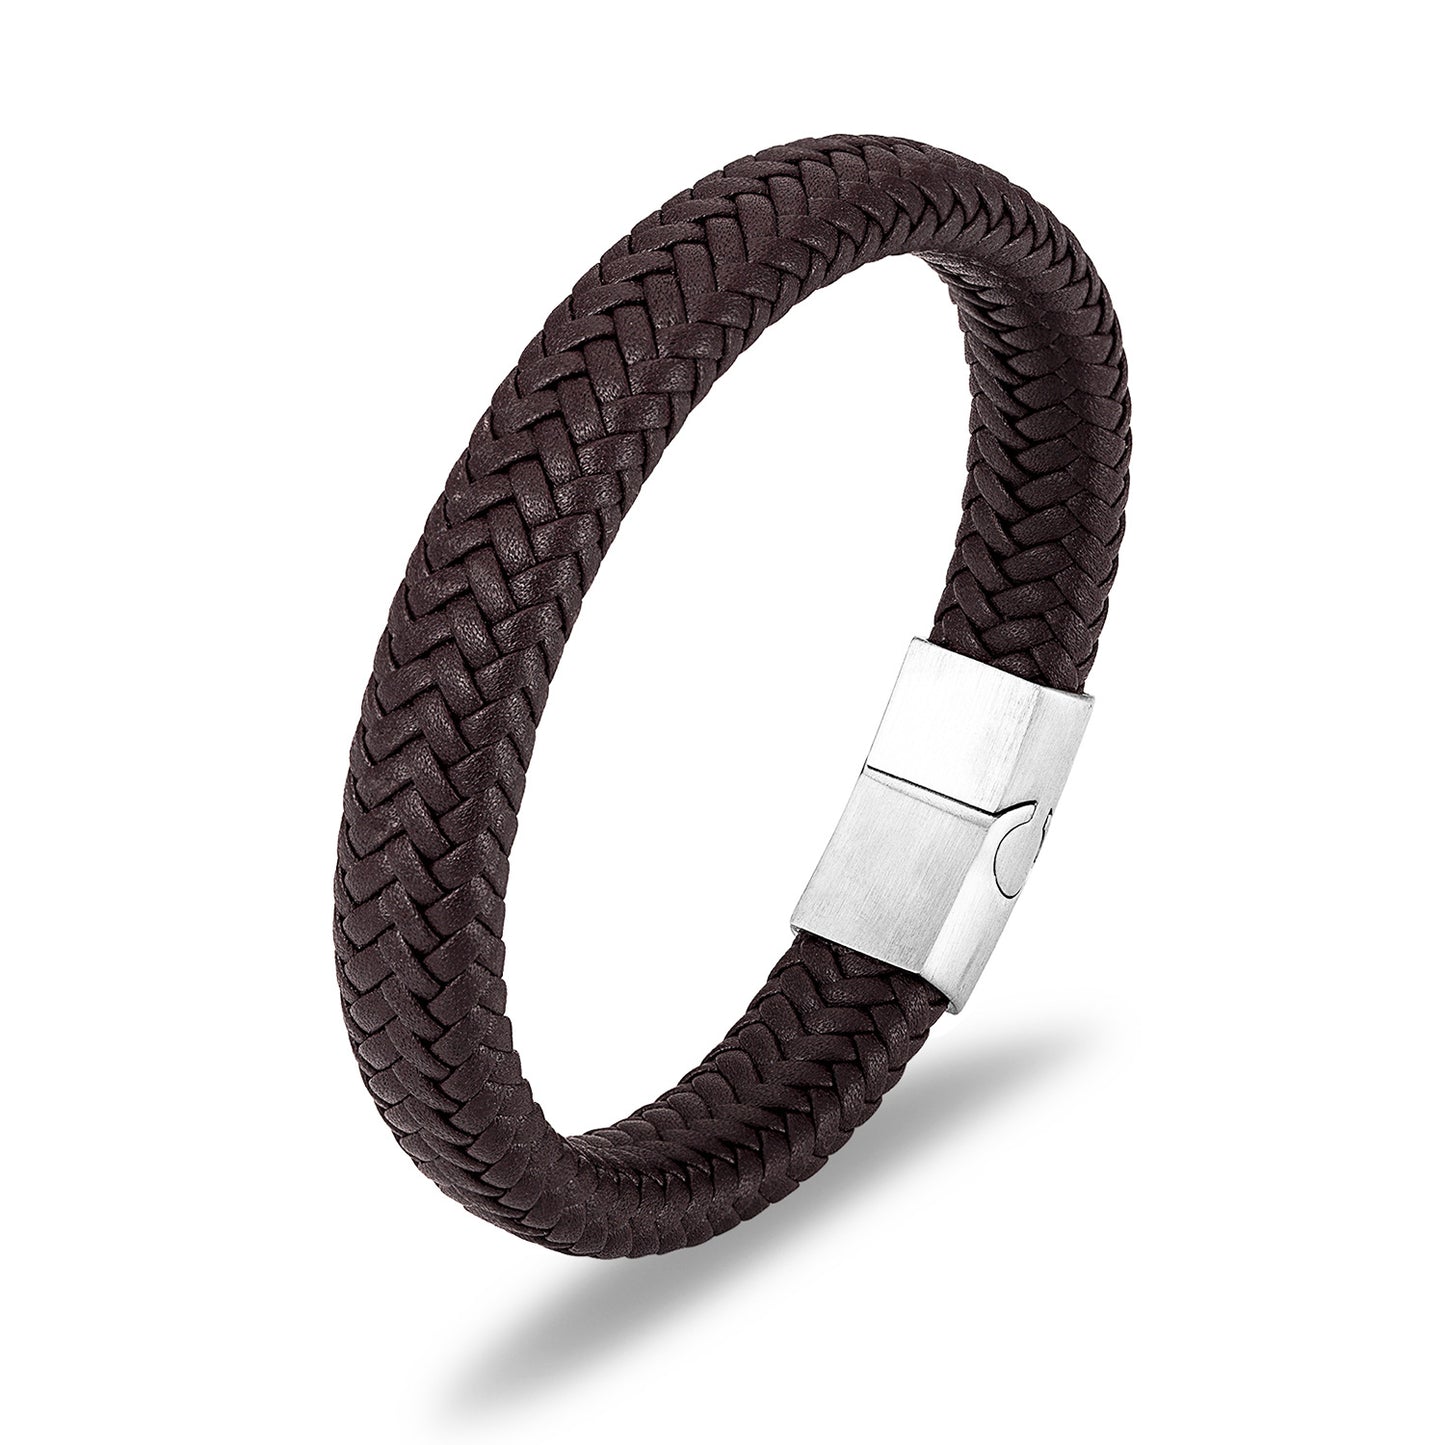 Men's Fashion Woven Leather Simplicity Stainless Steel Bracelets